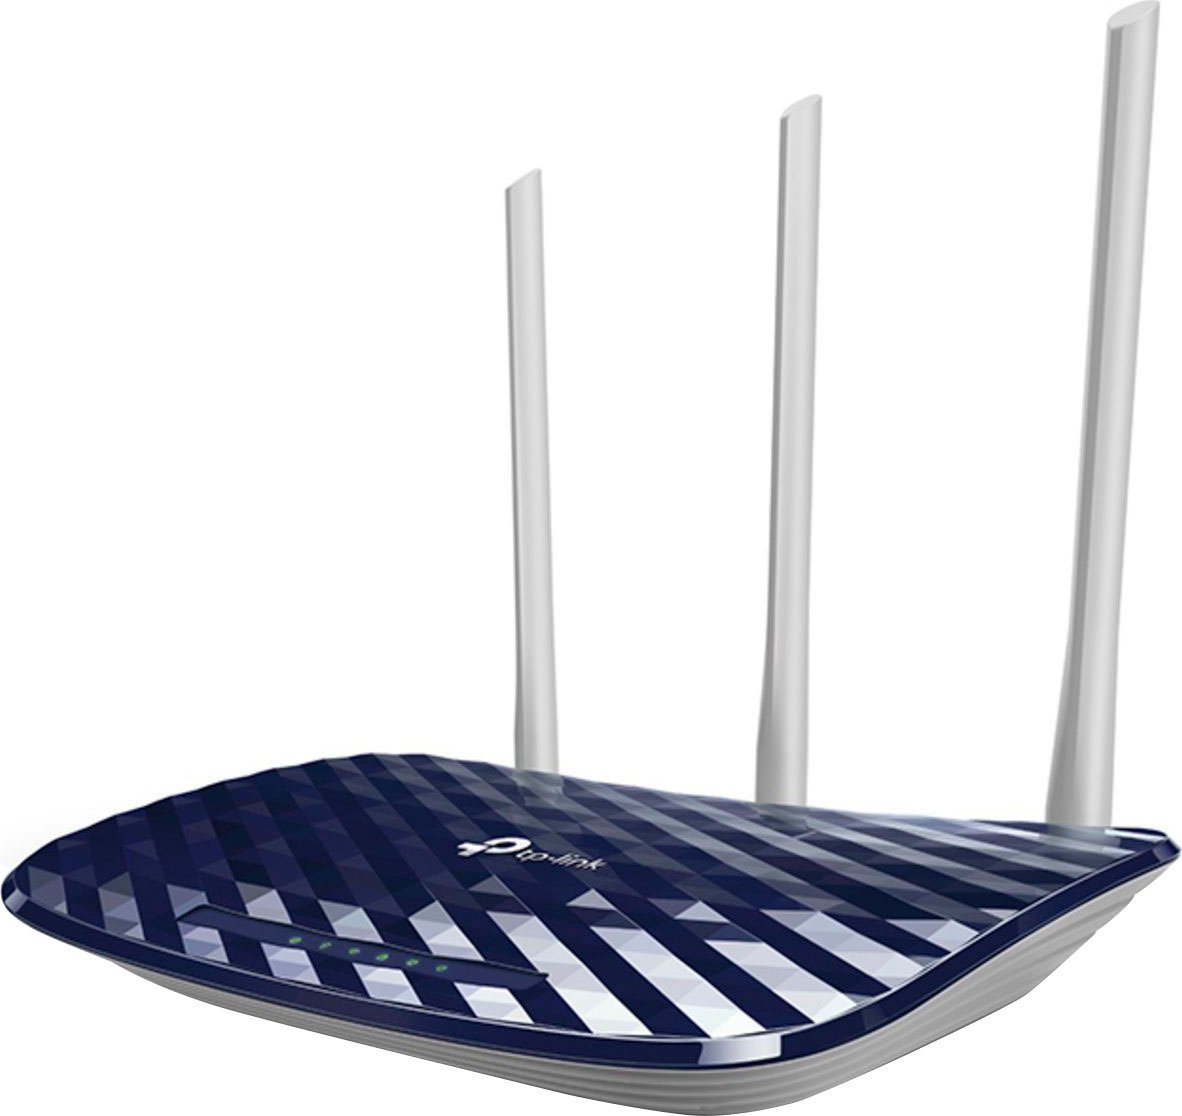 tp-link Archer C20 AC750 Dual Band Wireless Router WLAN-Router von tp-link